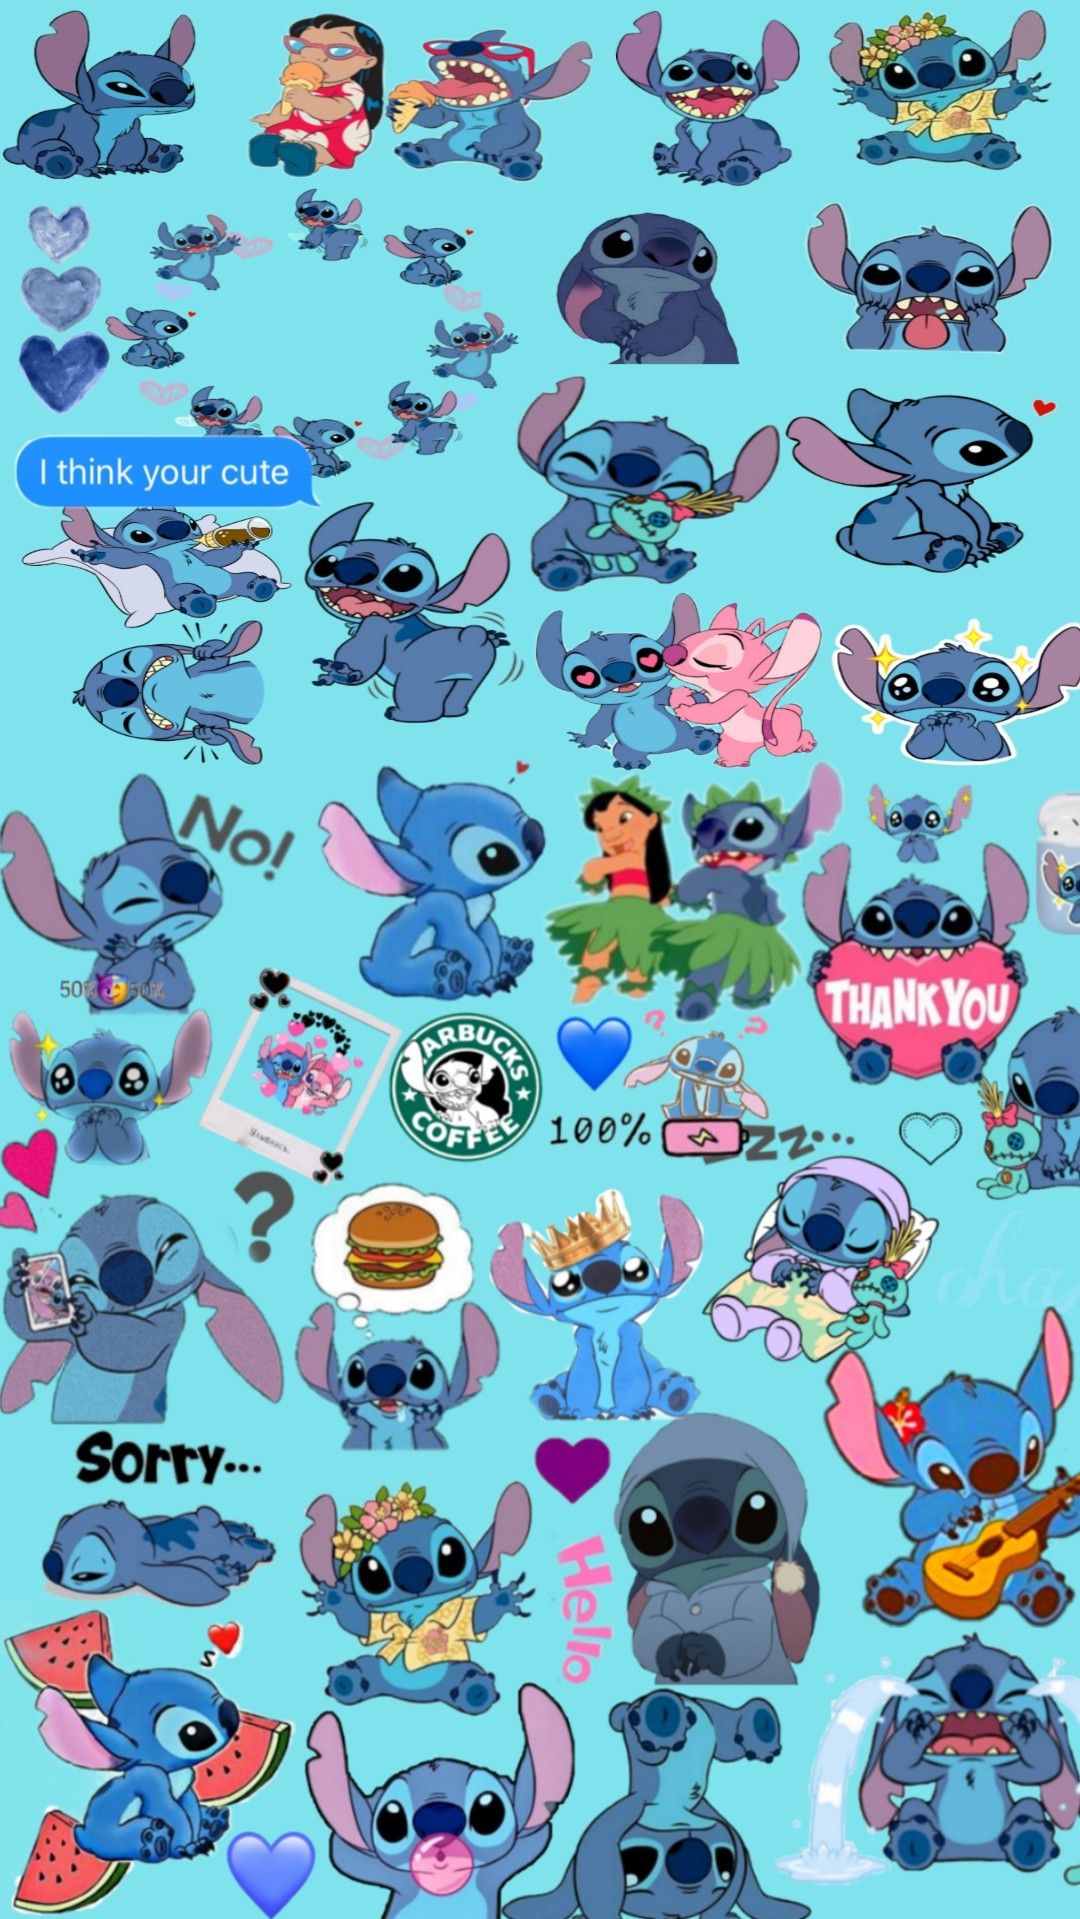 100+] Stitch Collage Wallpapers